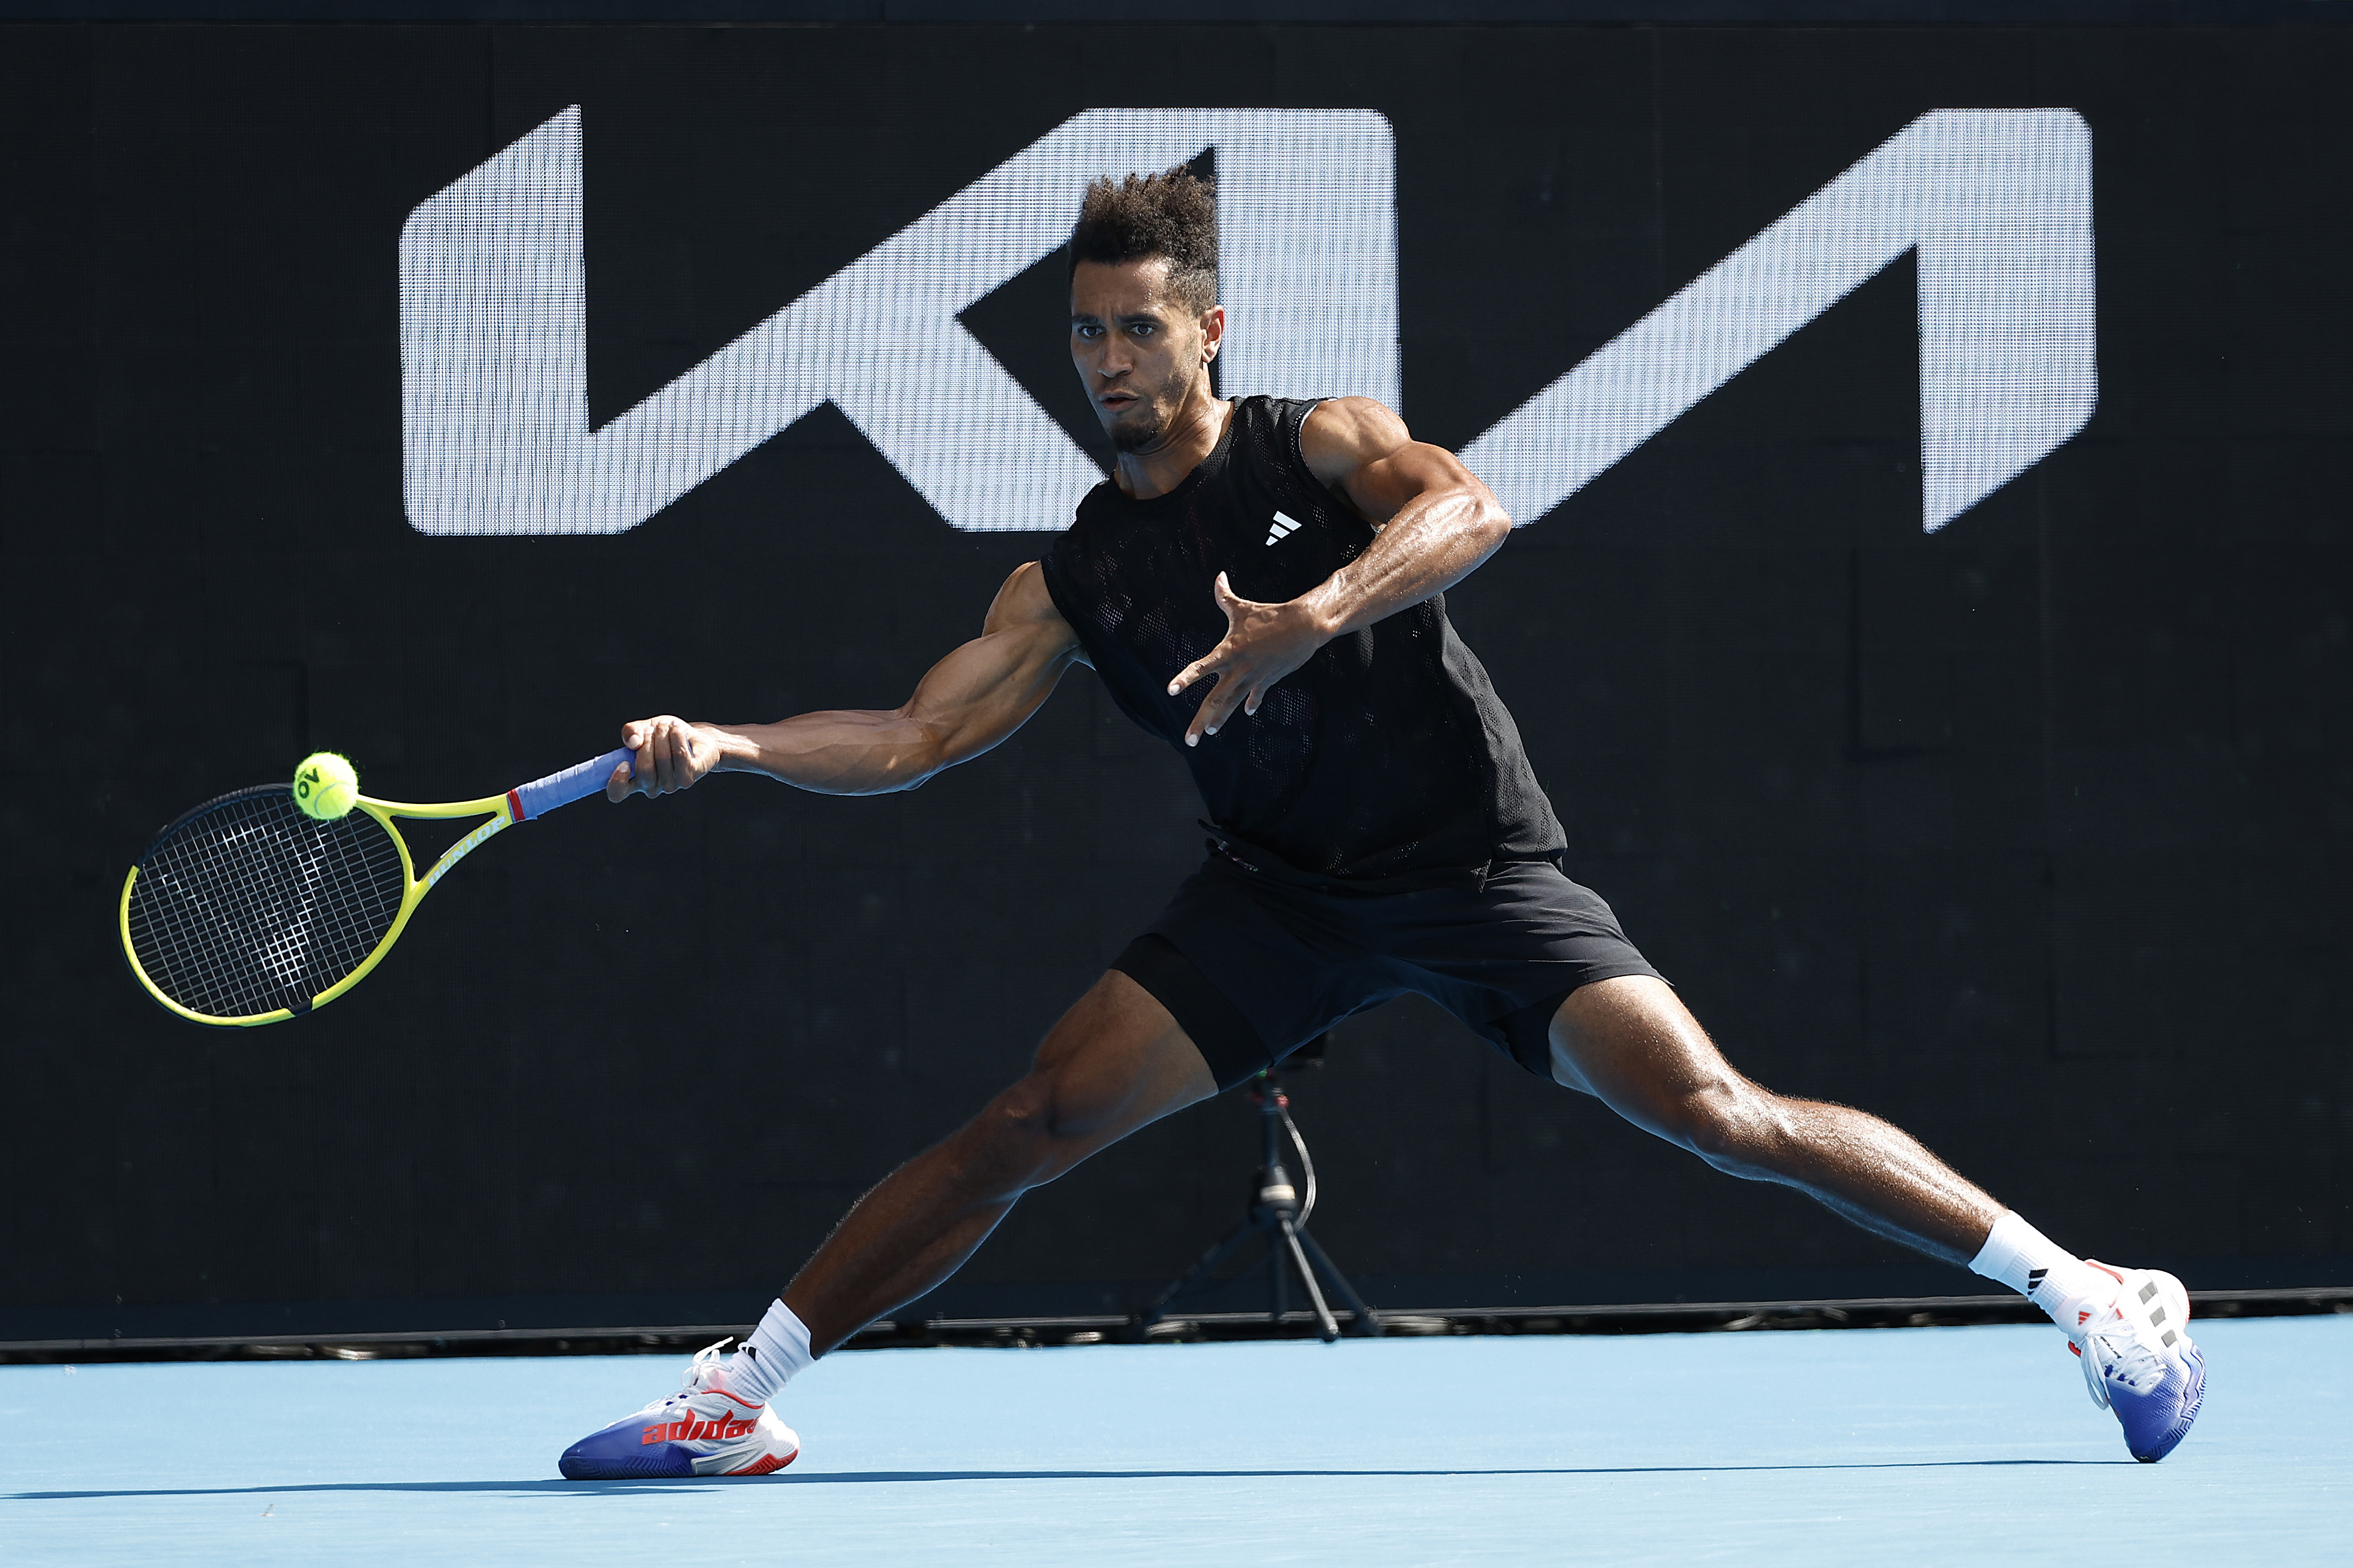 Australian Open news Michael Mmoh blows up at umpire over loud crowd